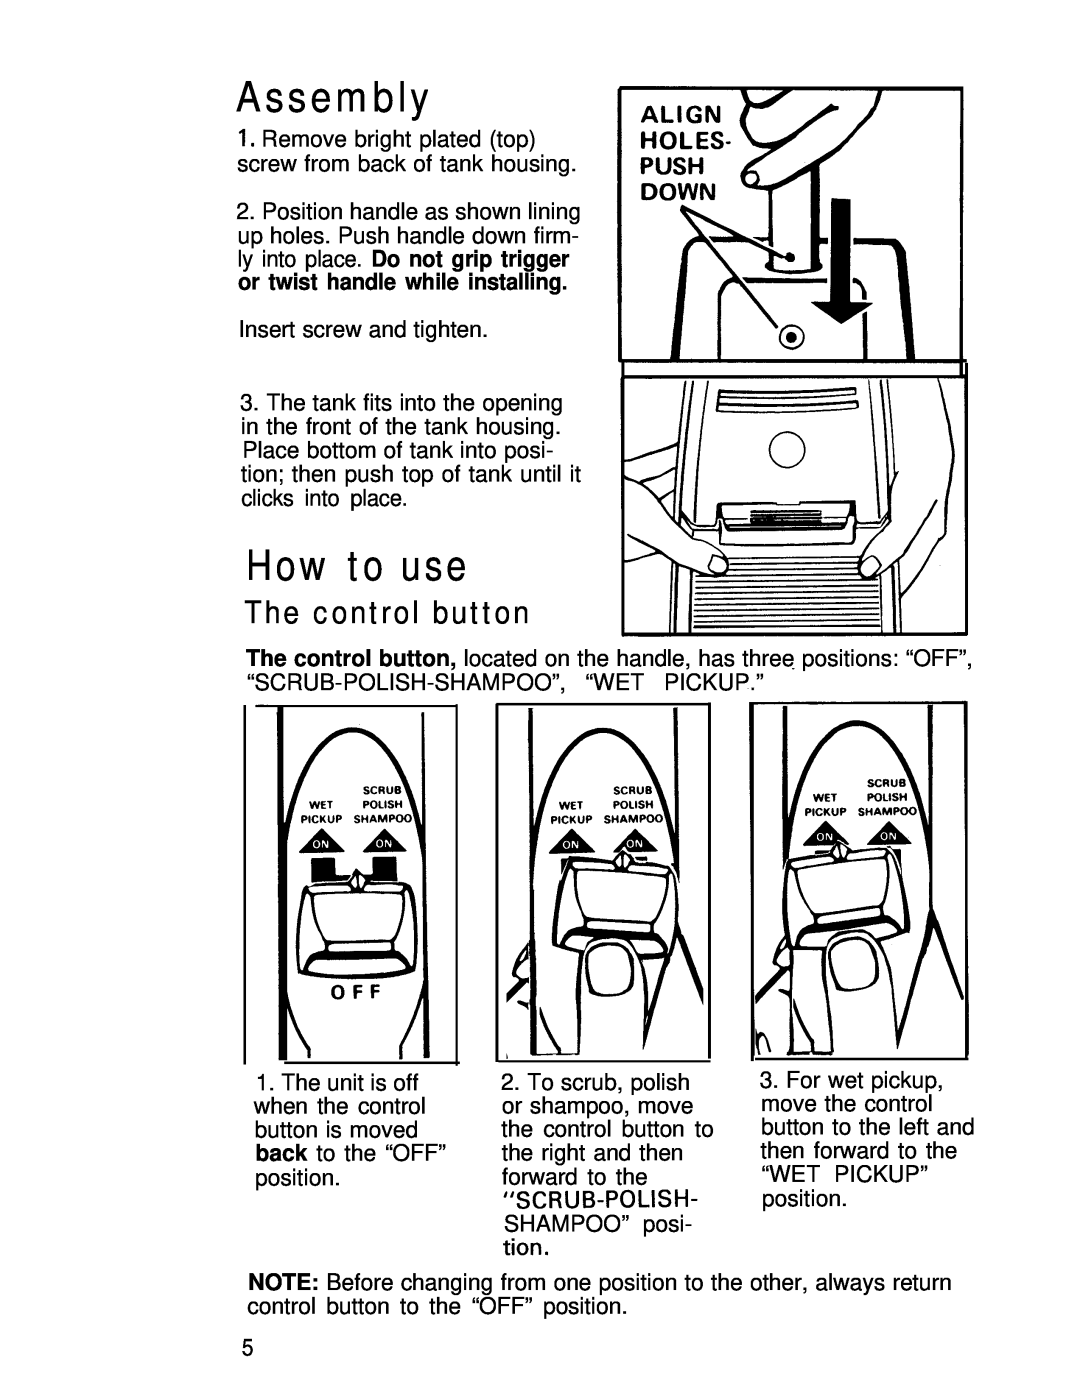 Hoover Shampoo- Polisher manual Assembly, How to use, The control button 